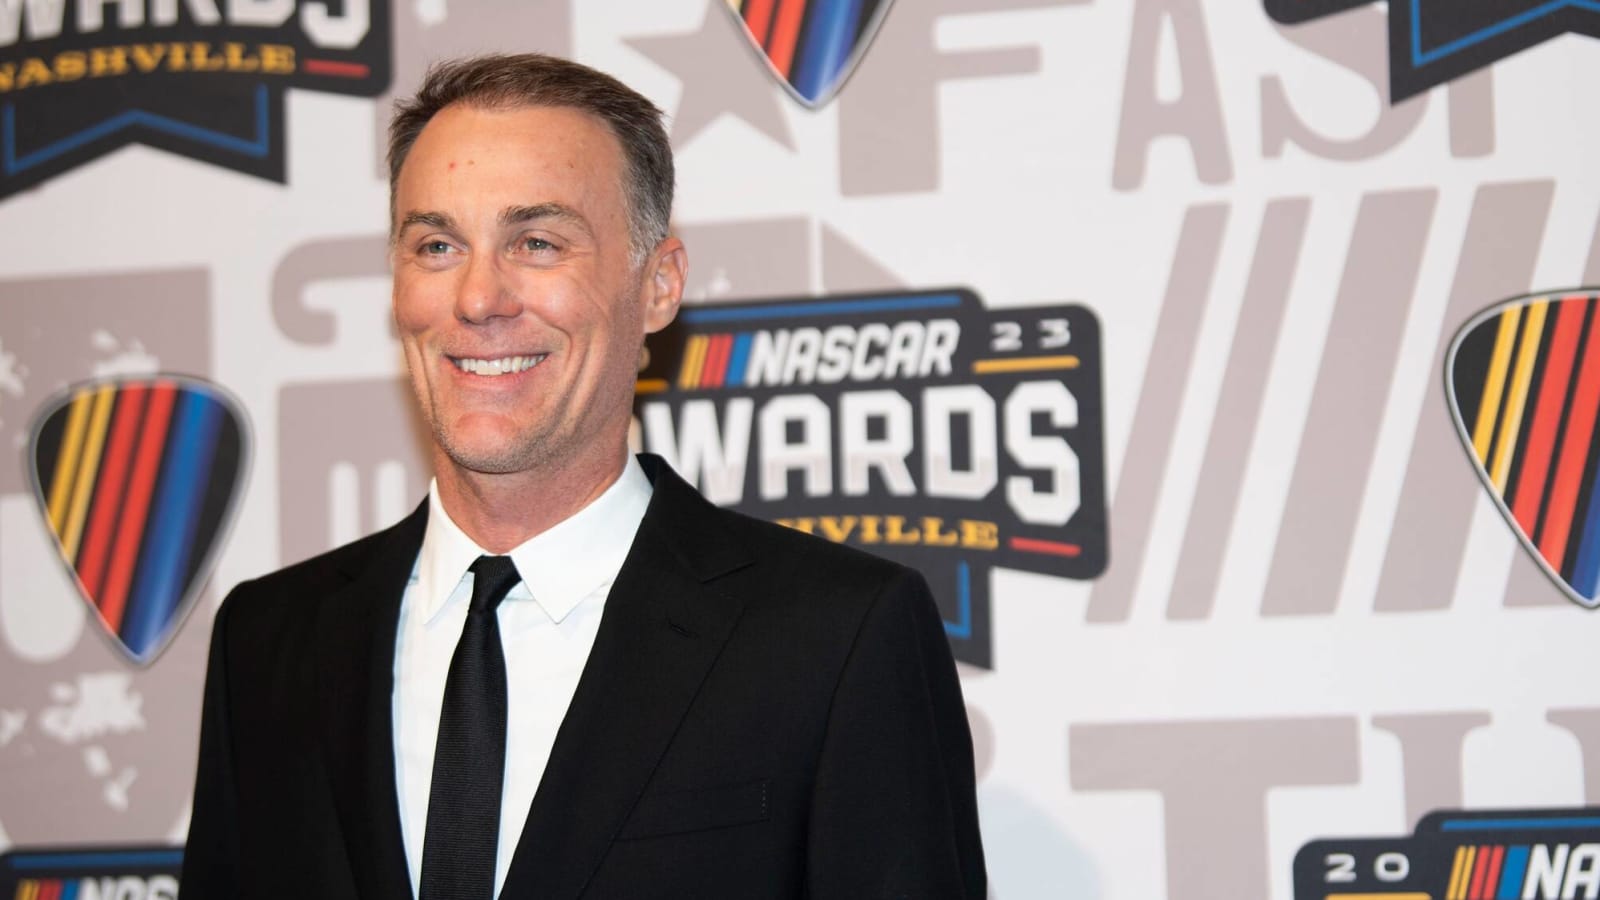 Kevin Harvick disagrees with Larry McReynolds on Denny Hamlin win total this season, concedes 60 wins is toast